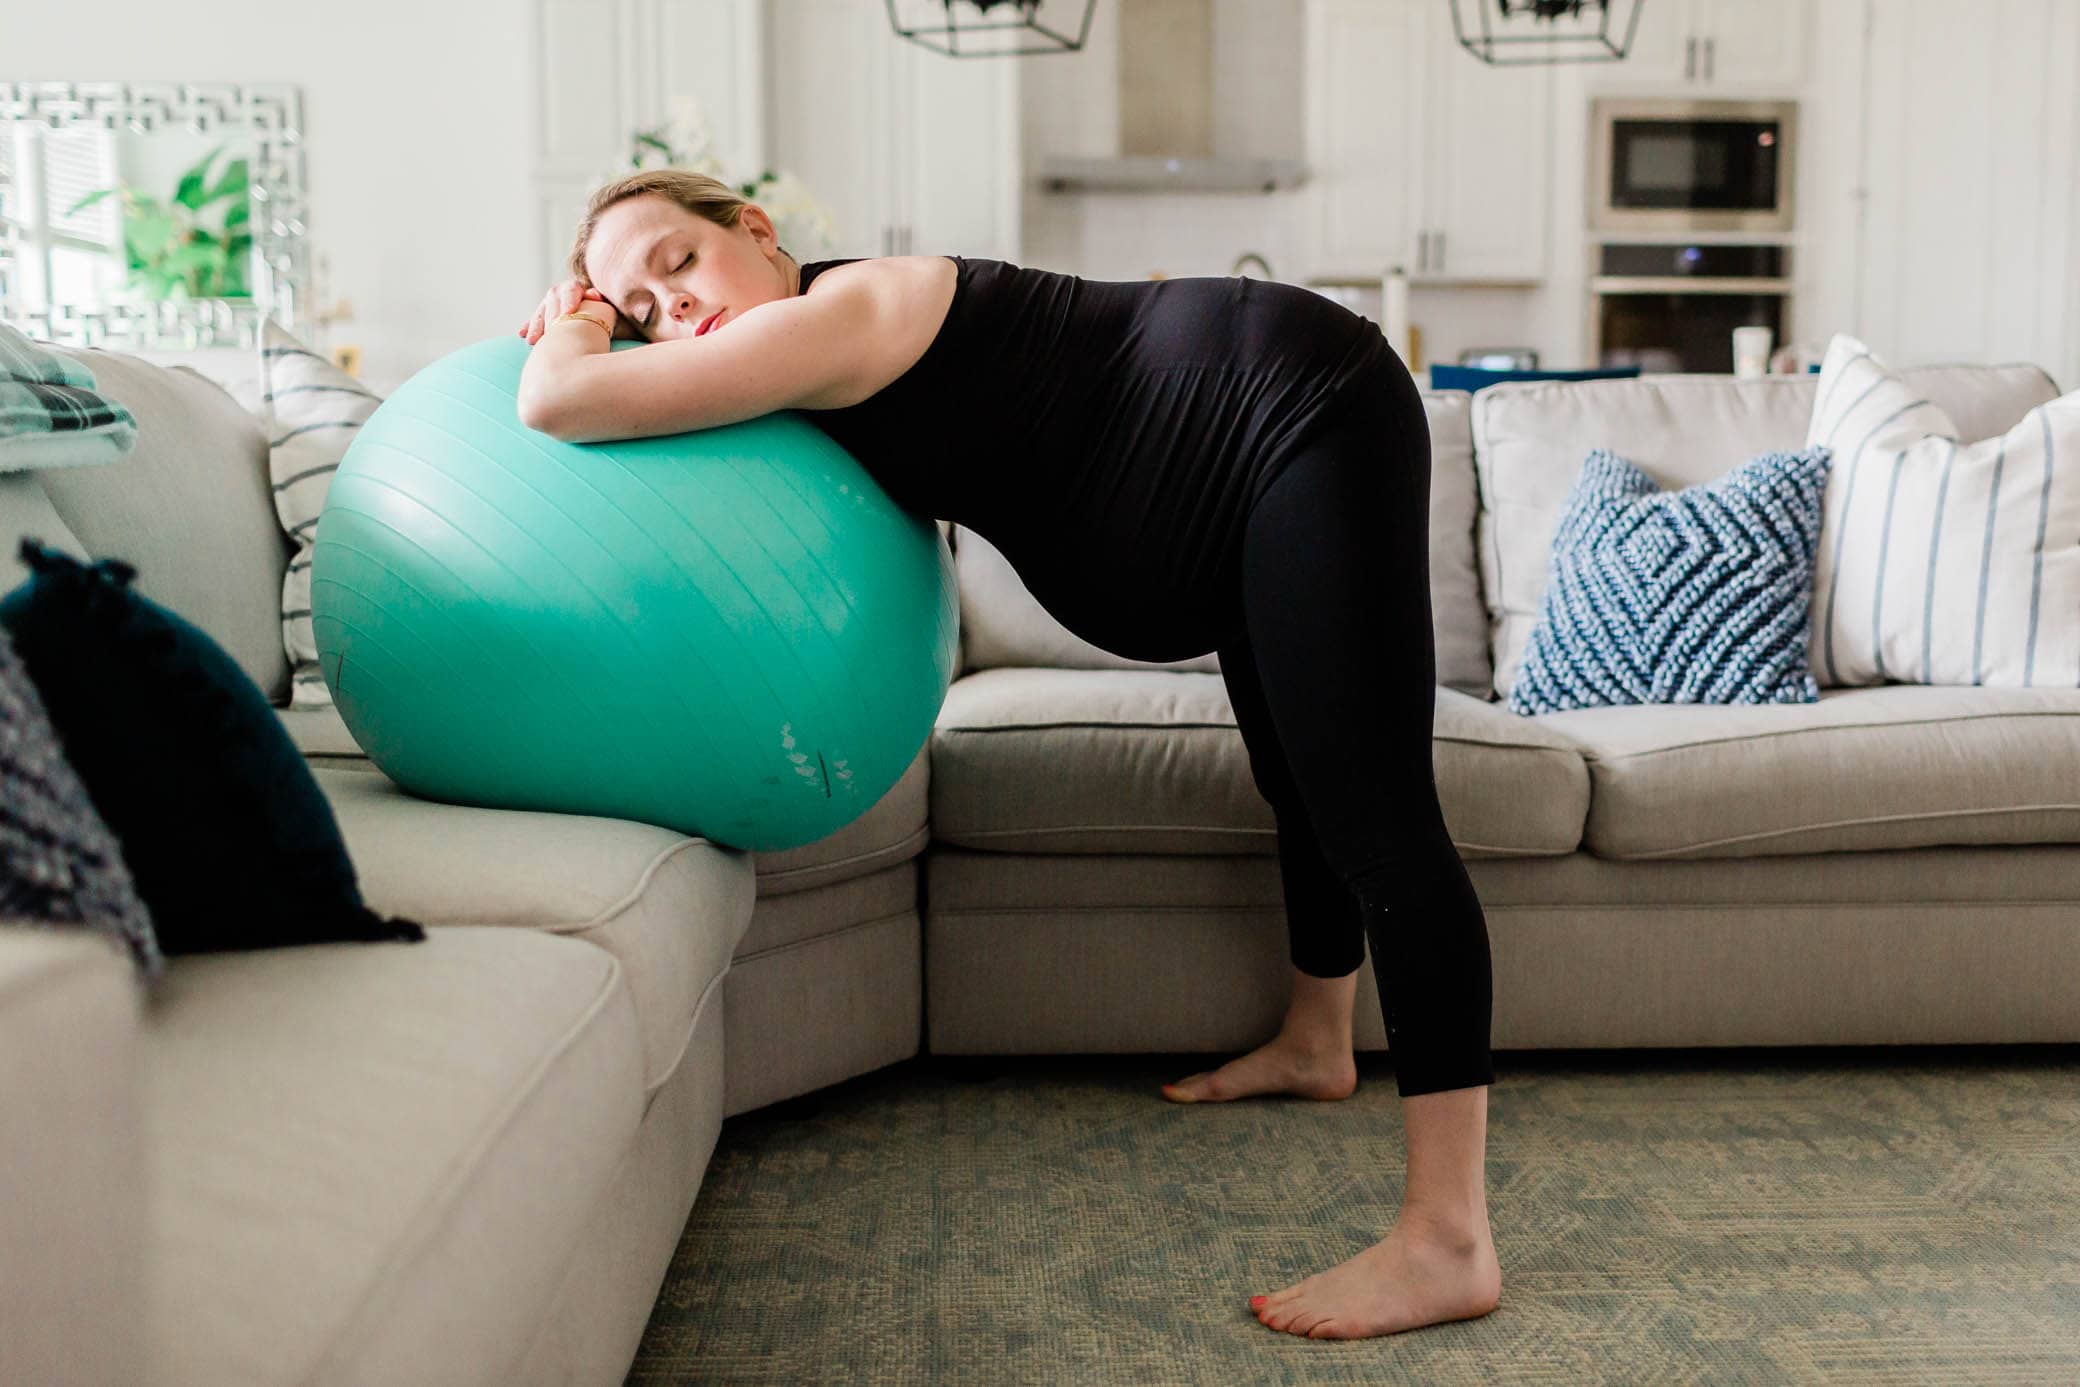 Pregnant woman standing up and leaning over on a birthing ball.